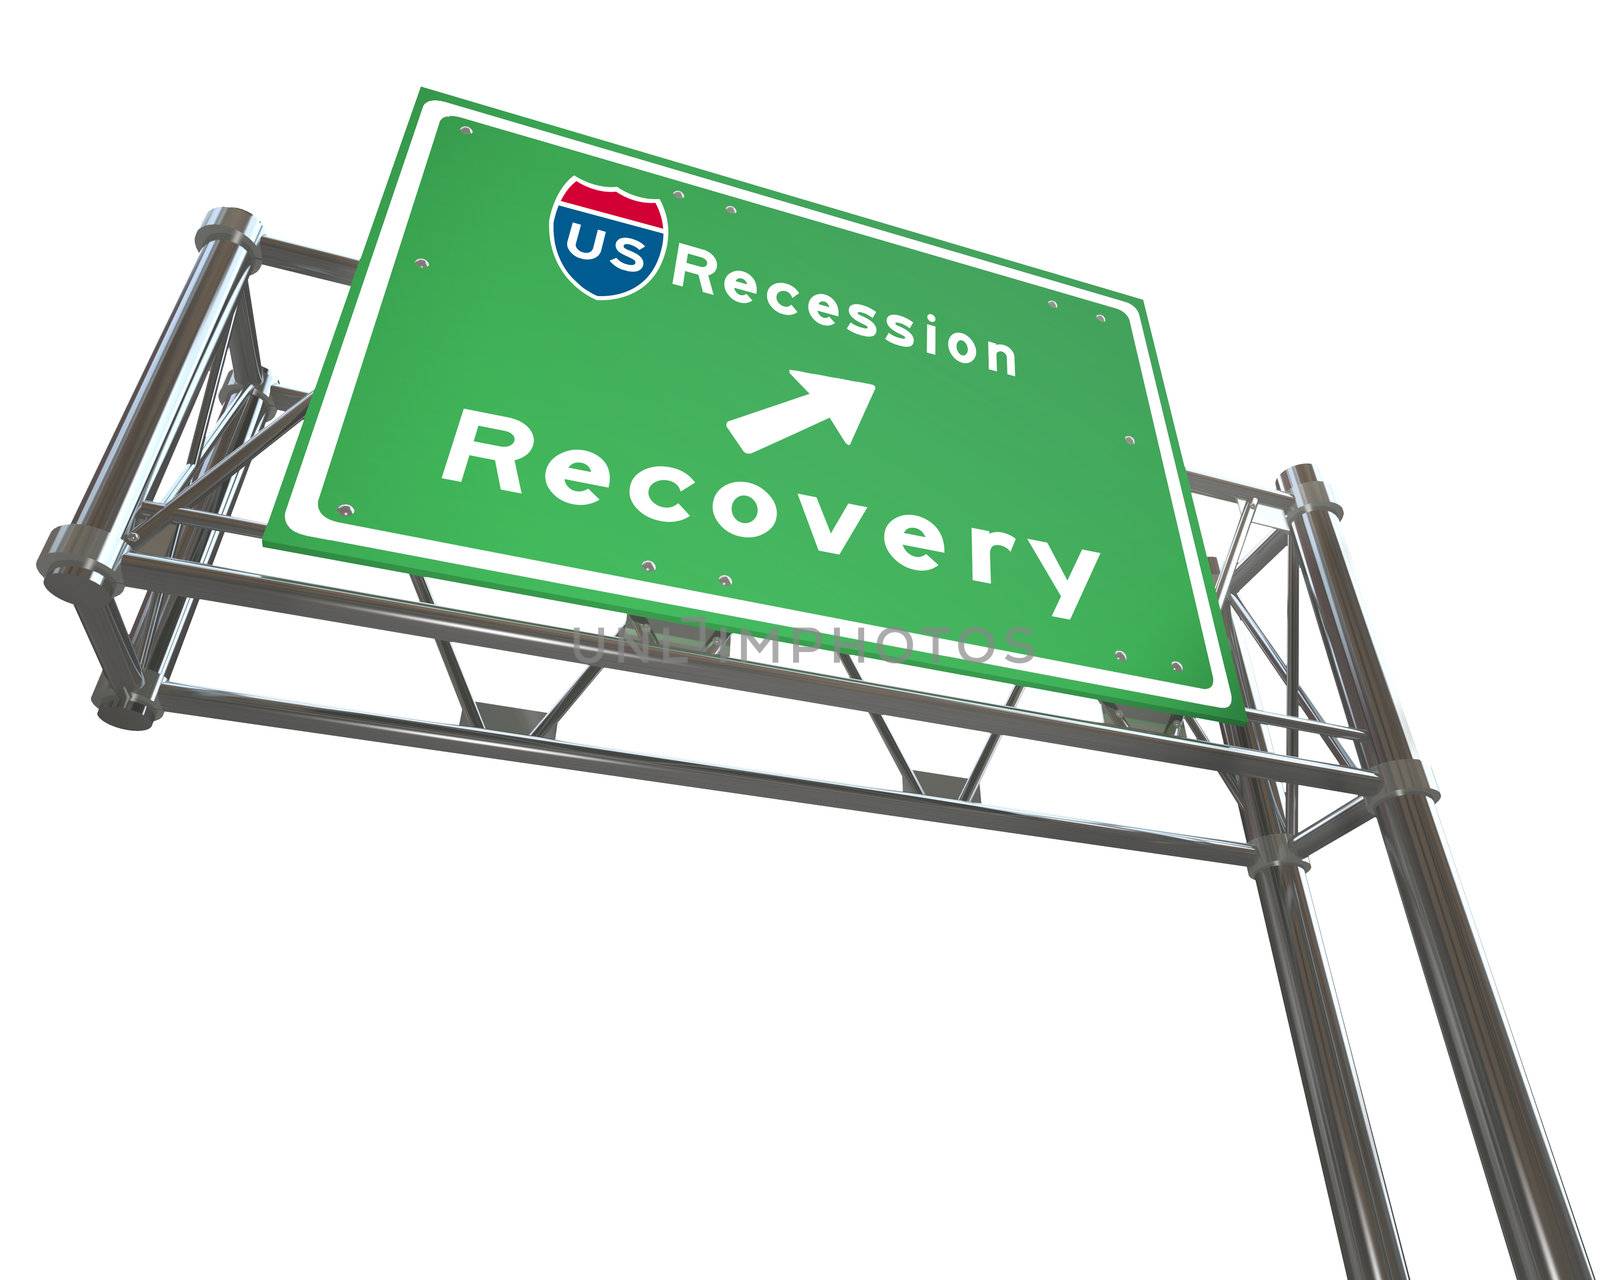 A green freeway sign against white background with the words US Recession - Recovery